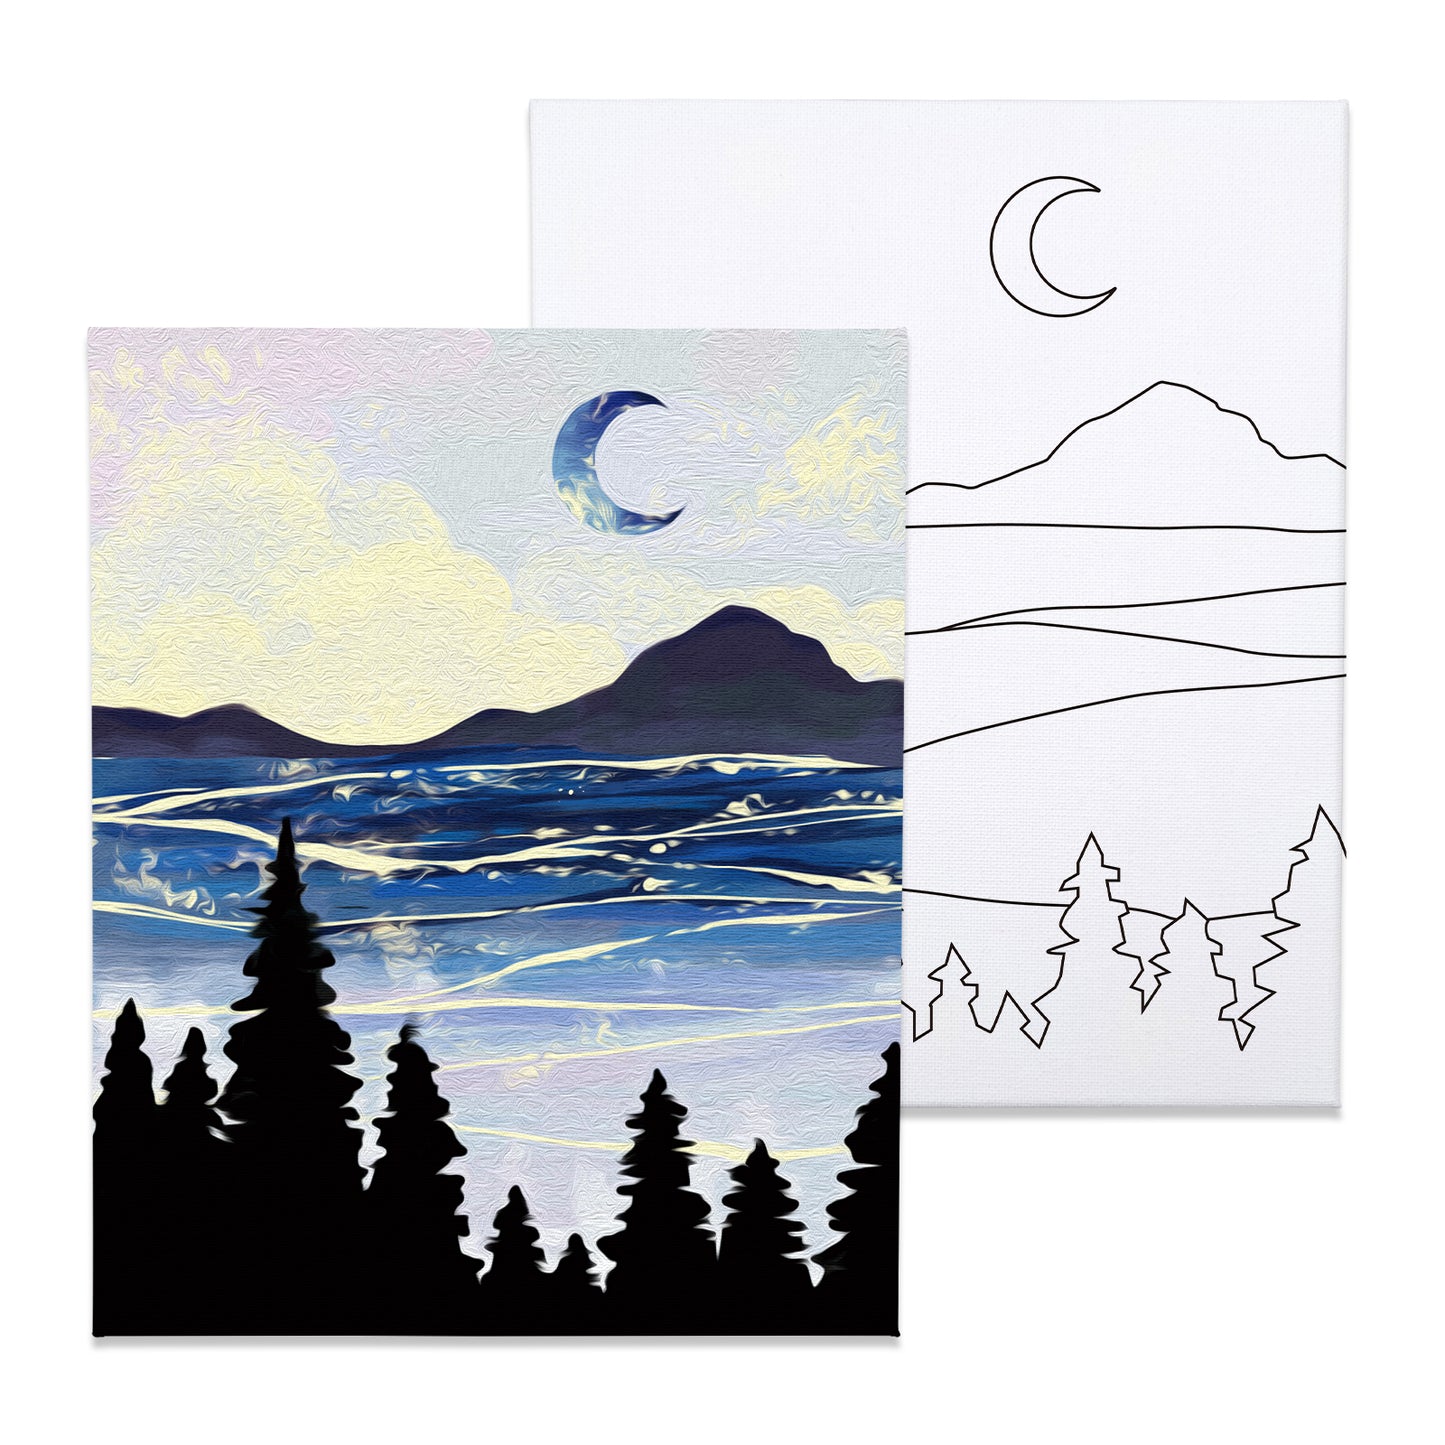 VOCHIC Canvas Painting Kit Pre Drawn Canvas for Painting for Adults Party  Party Kits Paint and Sip Party Supplies 8x10 Canvas to Paint Moonlit Night  8